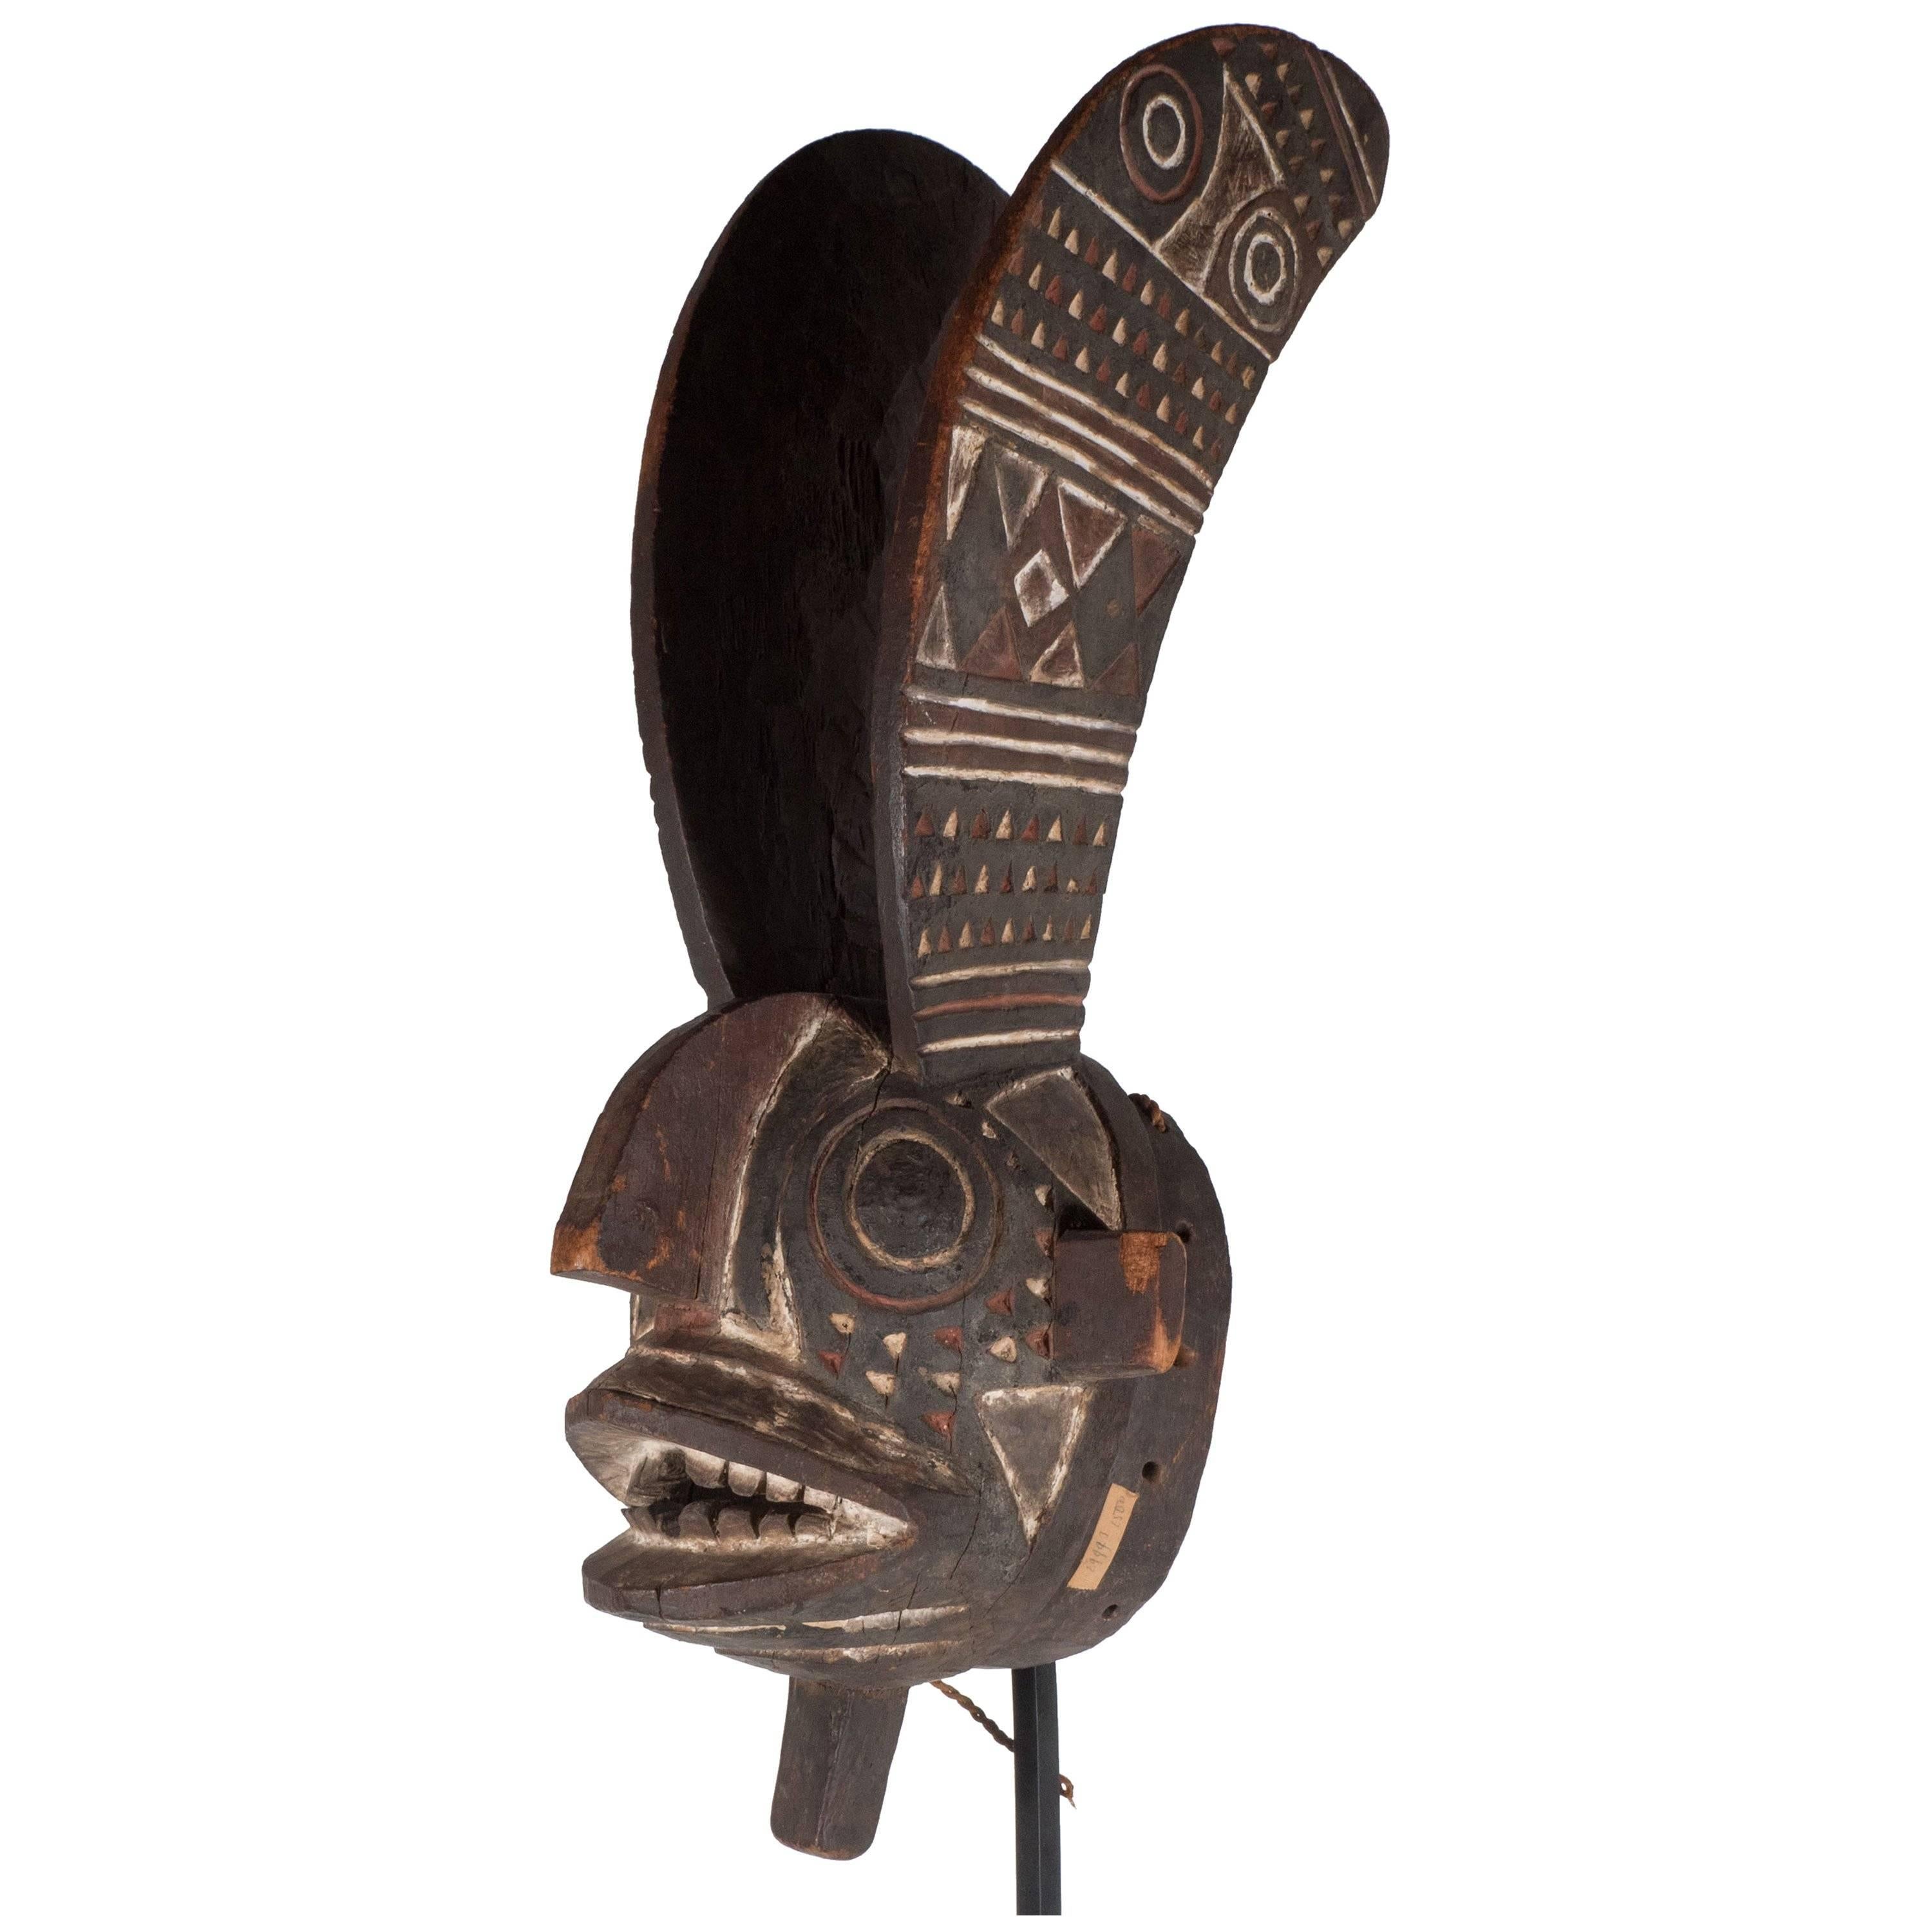 19th Century Bwa Mask Burkina Faso Mounted on Custom Black Enamel Stand - Tribal Sculpture by Unknown